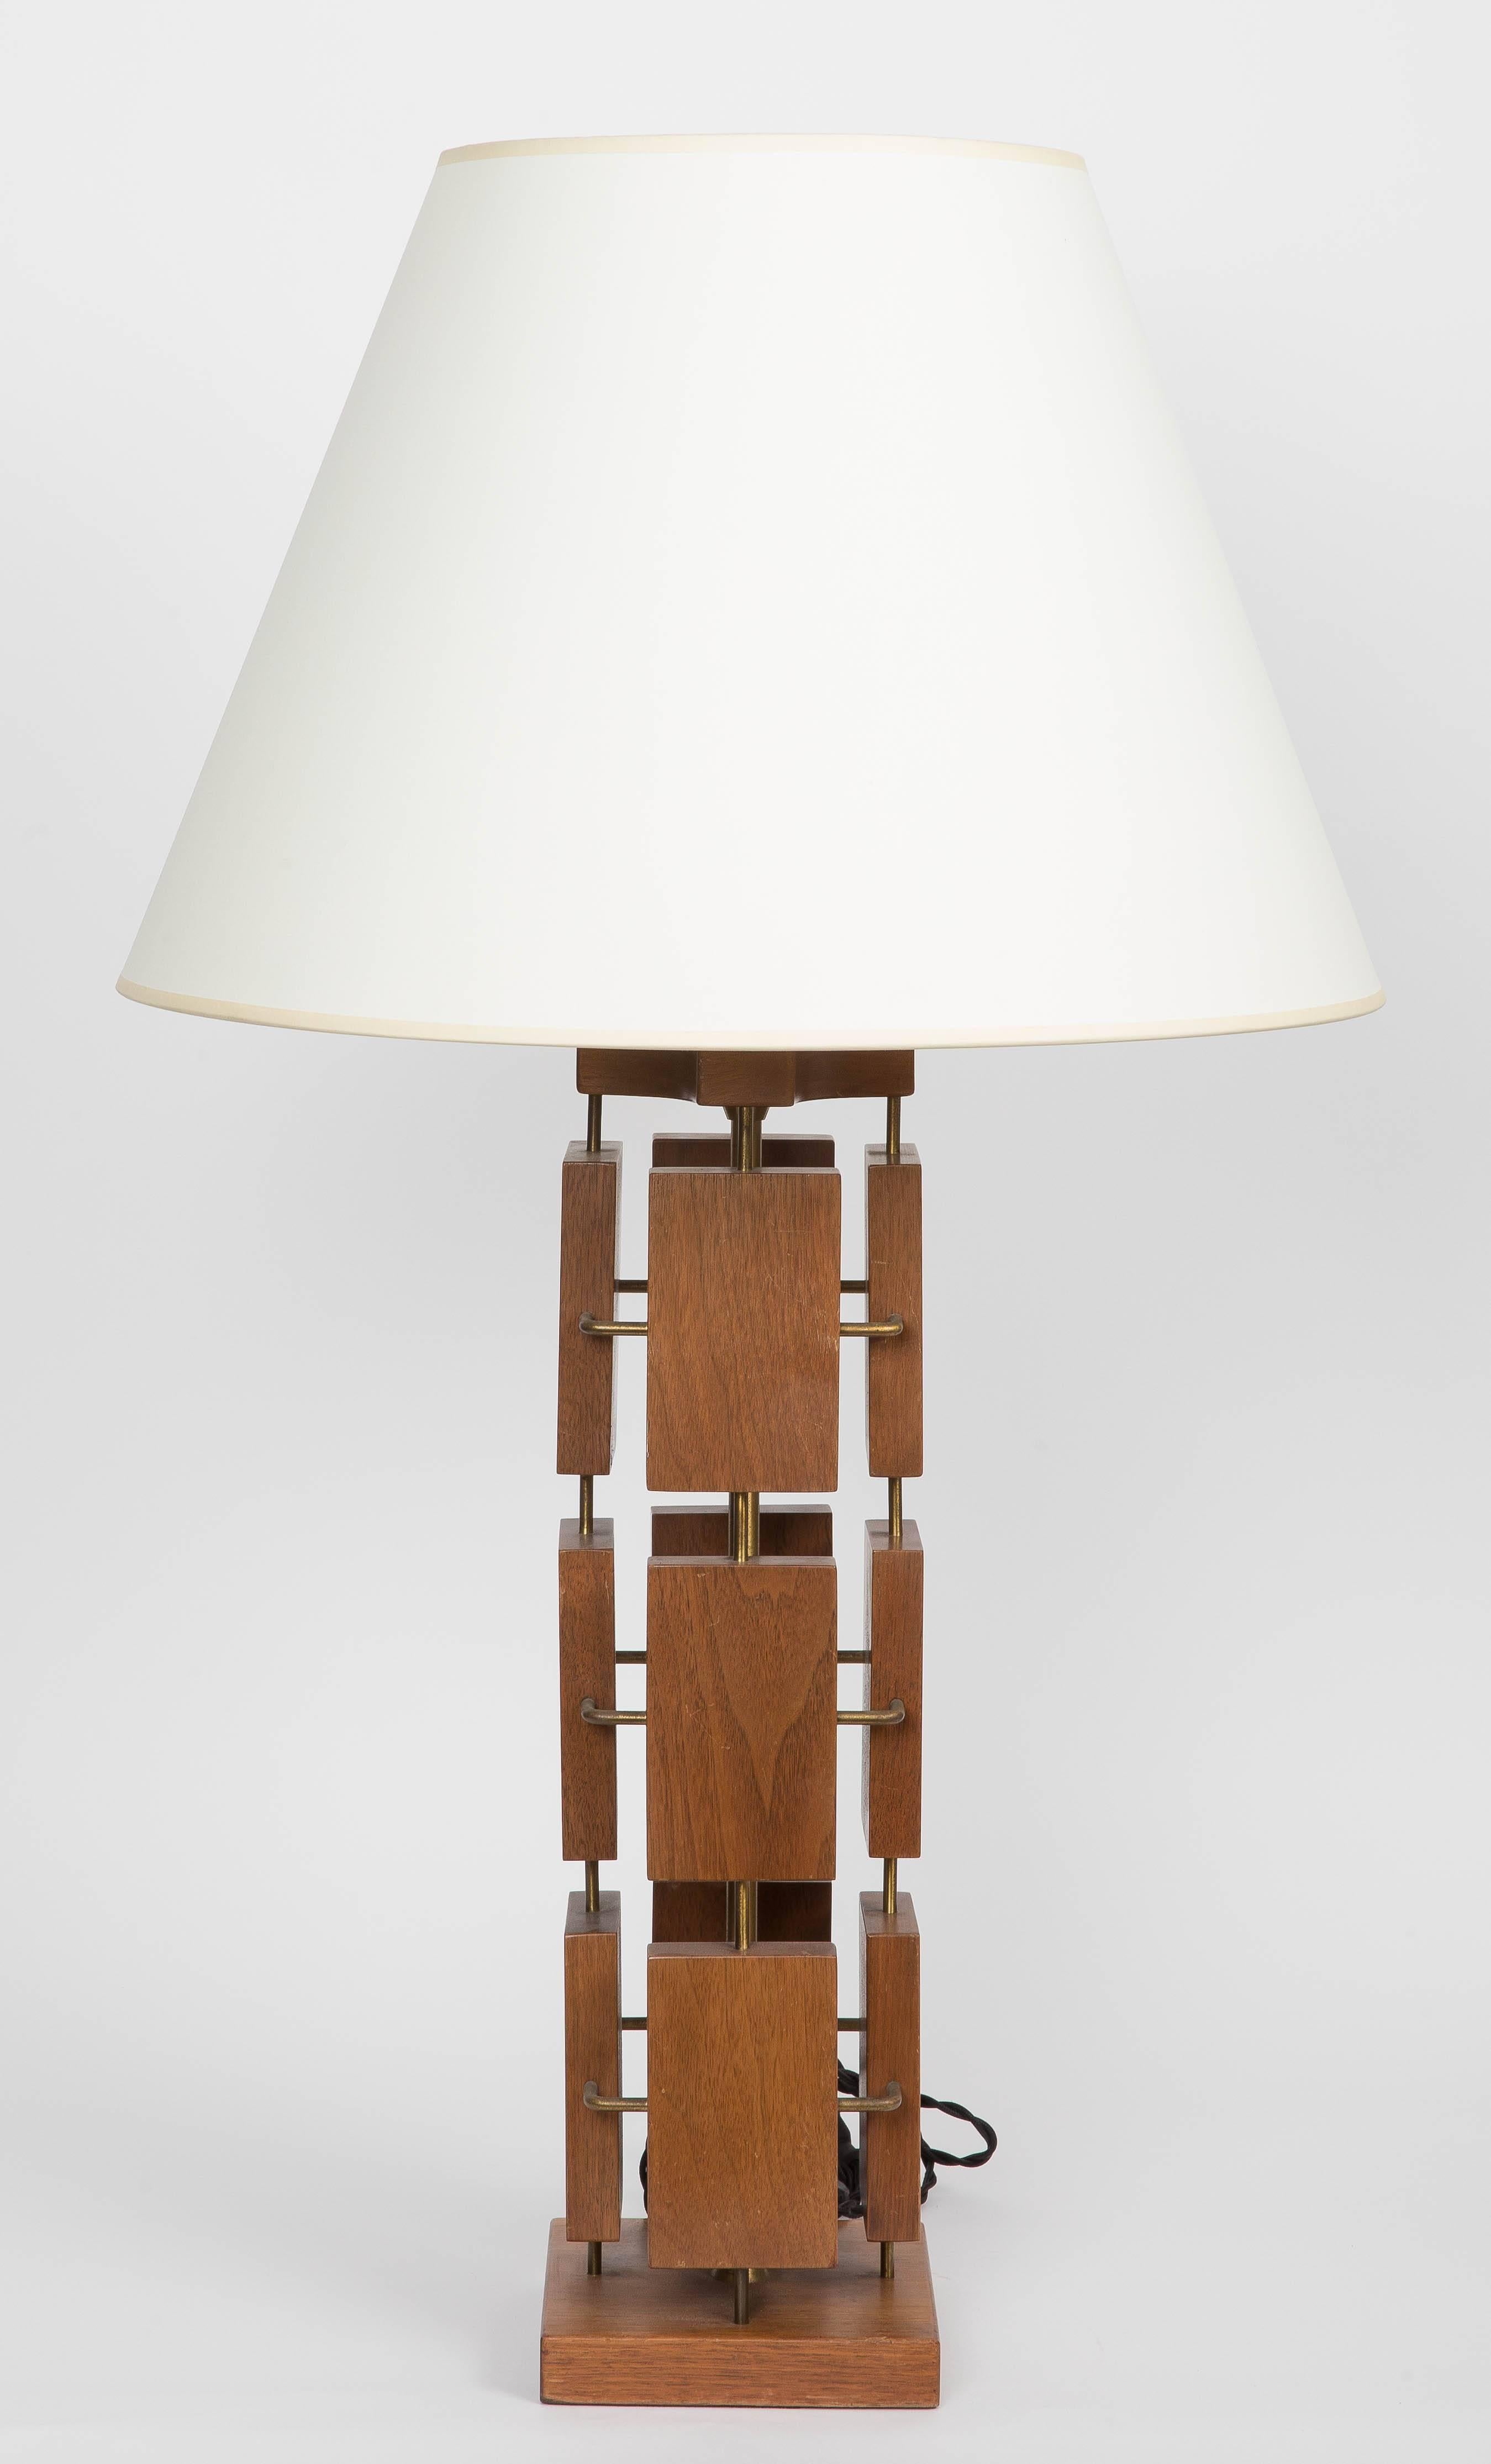 Modernist table lamp made with brass and mahogany.